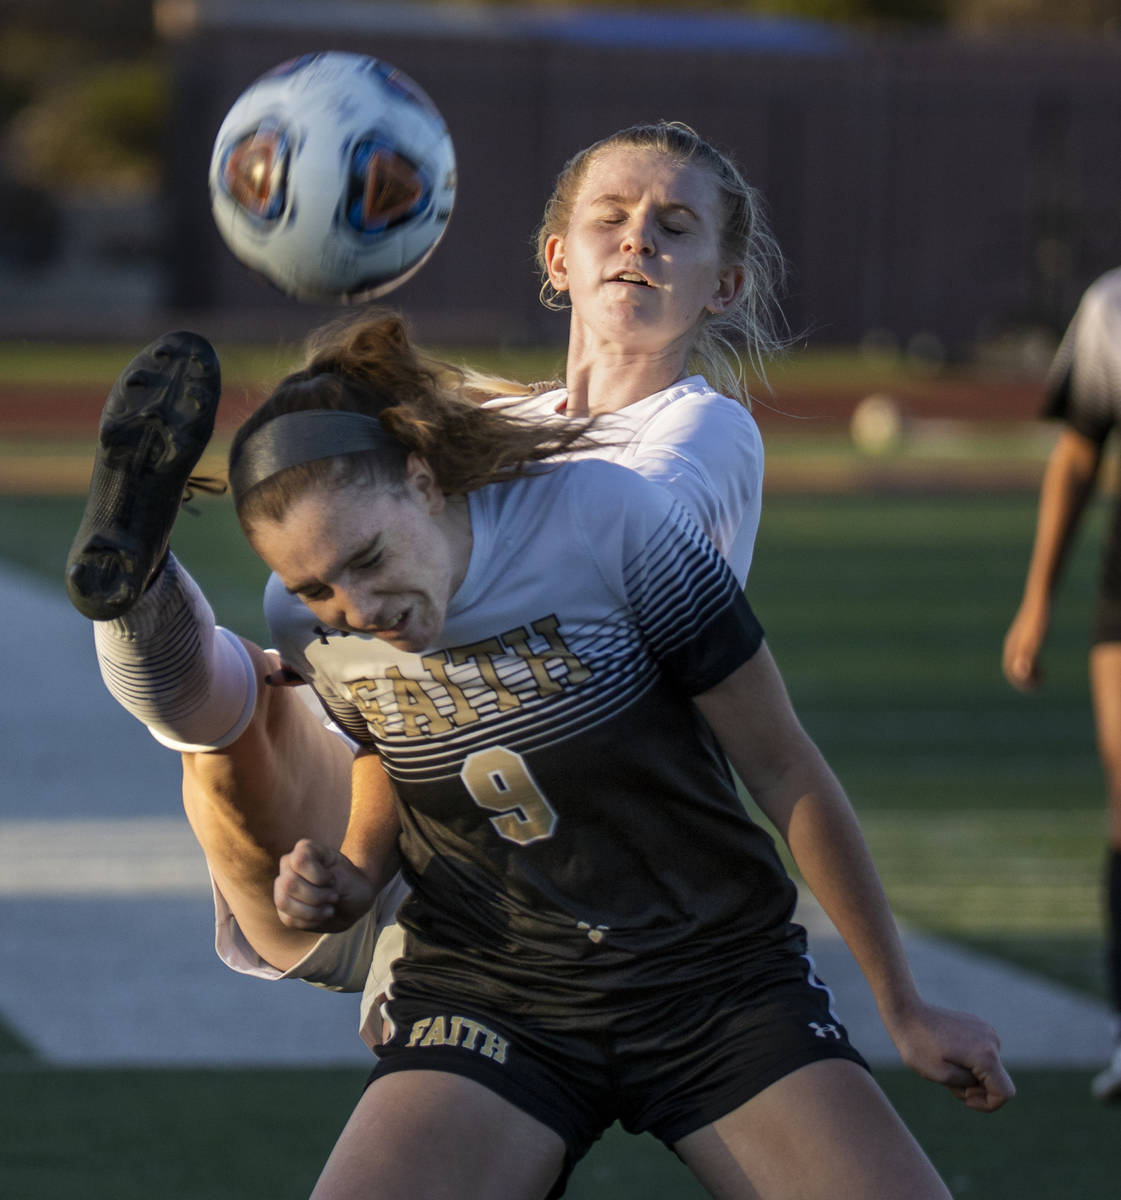 Faith Lutheran's Claire Dalbec (9) has a ball kicked past her head by Bishop Gorman's Michelle ...